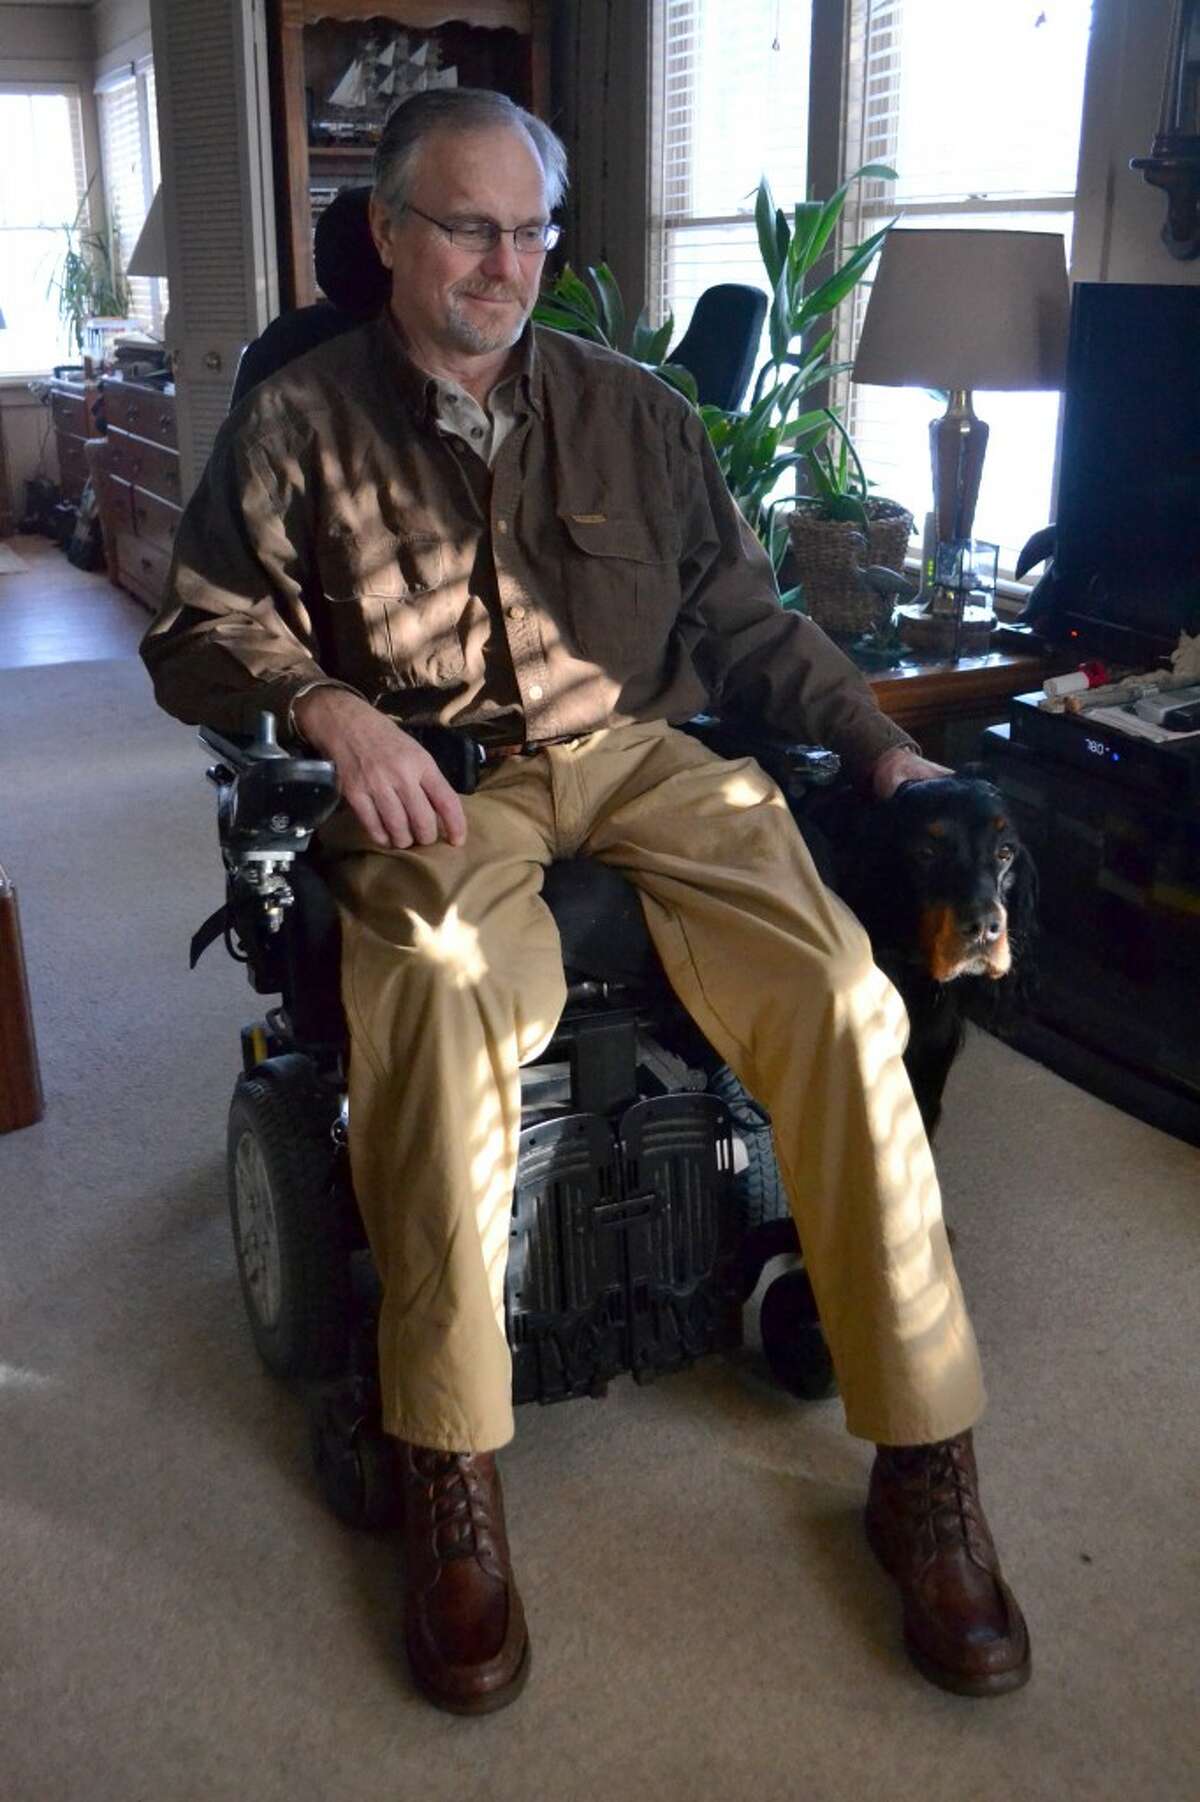 Charlie Ganss, who injured his spinal cord in a fall from a tree stand 13 years ago, is lobbying Blacker Airport to buy equipment that could load a power chair onto a plane. (Meg LeDuc/News Advocate)